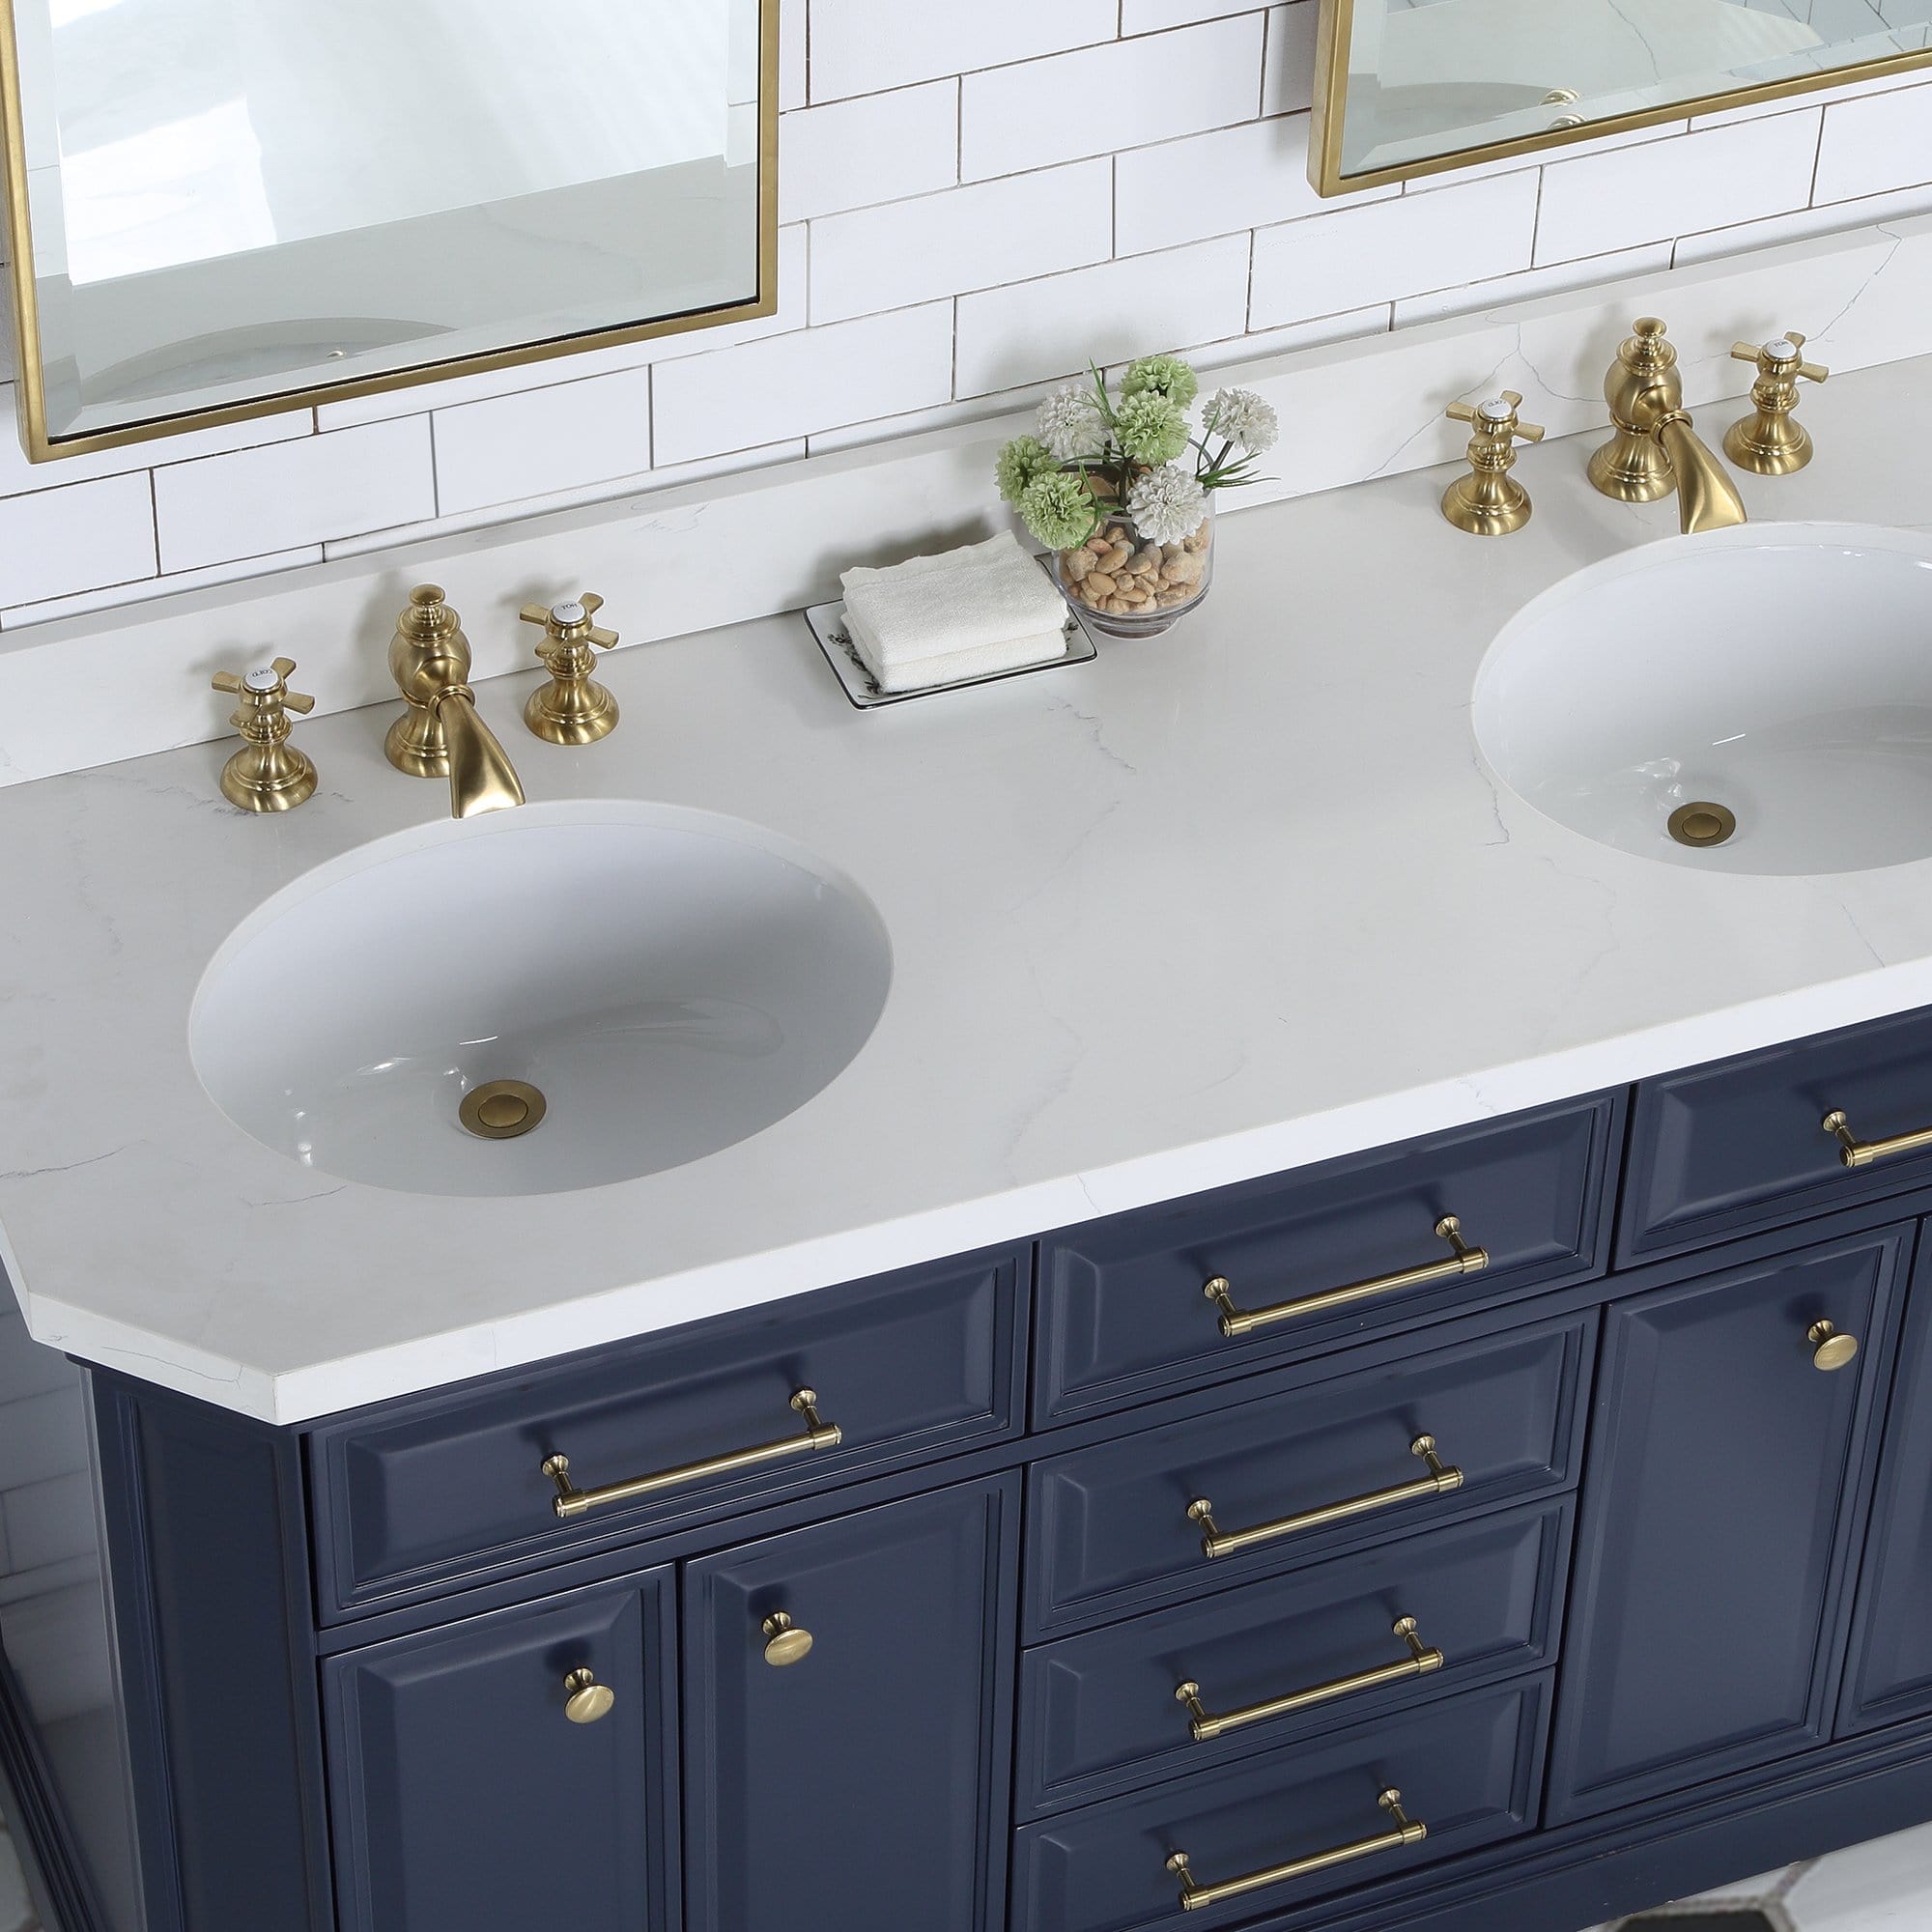 Water Creation Palace 60 In. Double Sink White Quartz Countertop Vanity in Monarch Blue with Waterfall Faucets and Mirrors - Molaix732030765023Bathroom vanityPA60QZ06MB-E18FX1306